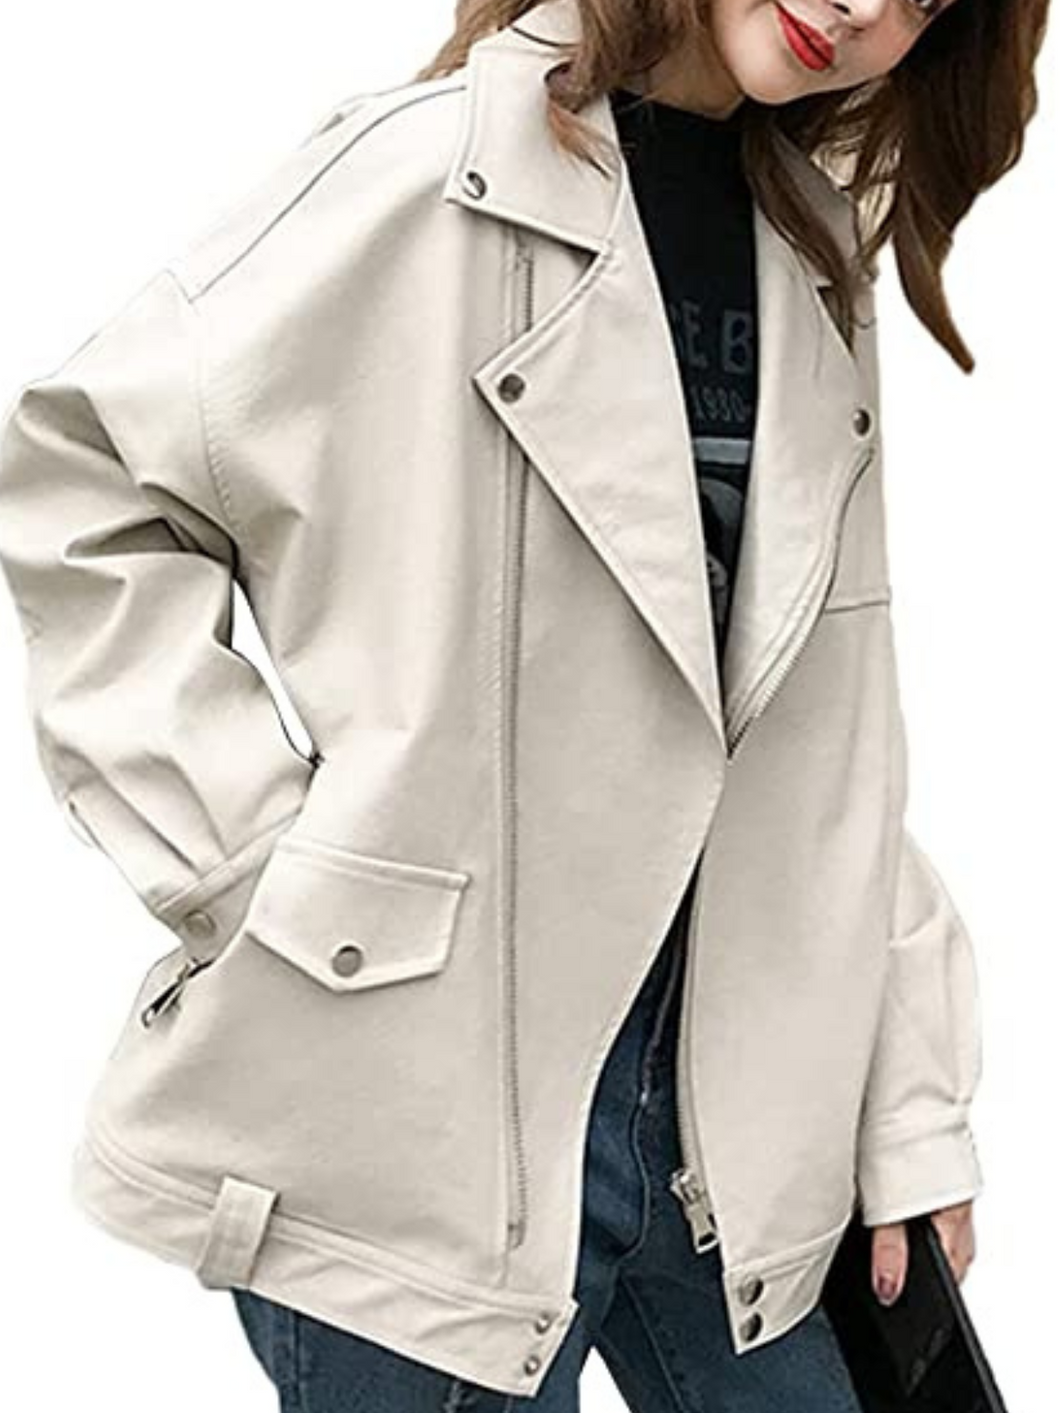 Women's Faux Leather White Motorcycle Jacket